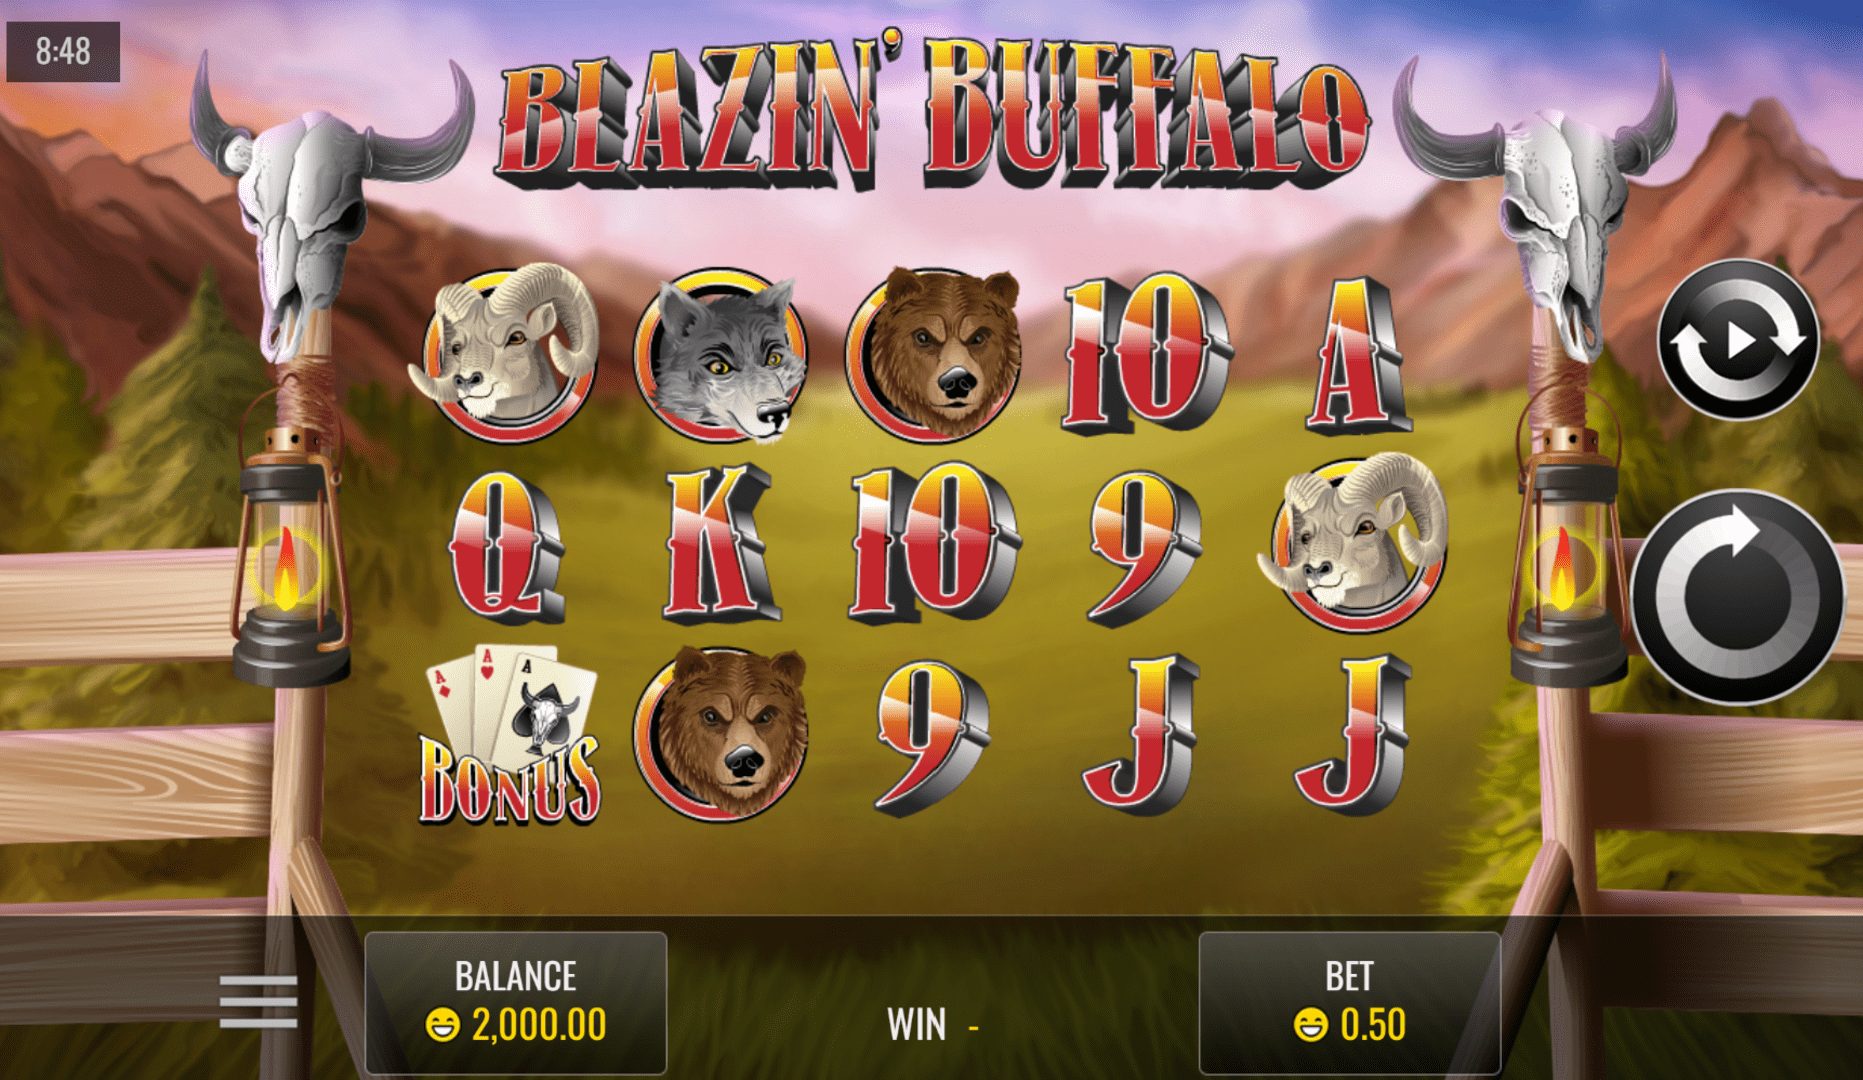 Blazin Buffalo slot game from Rival Games